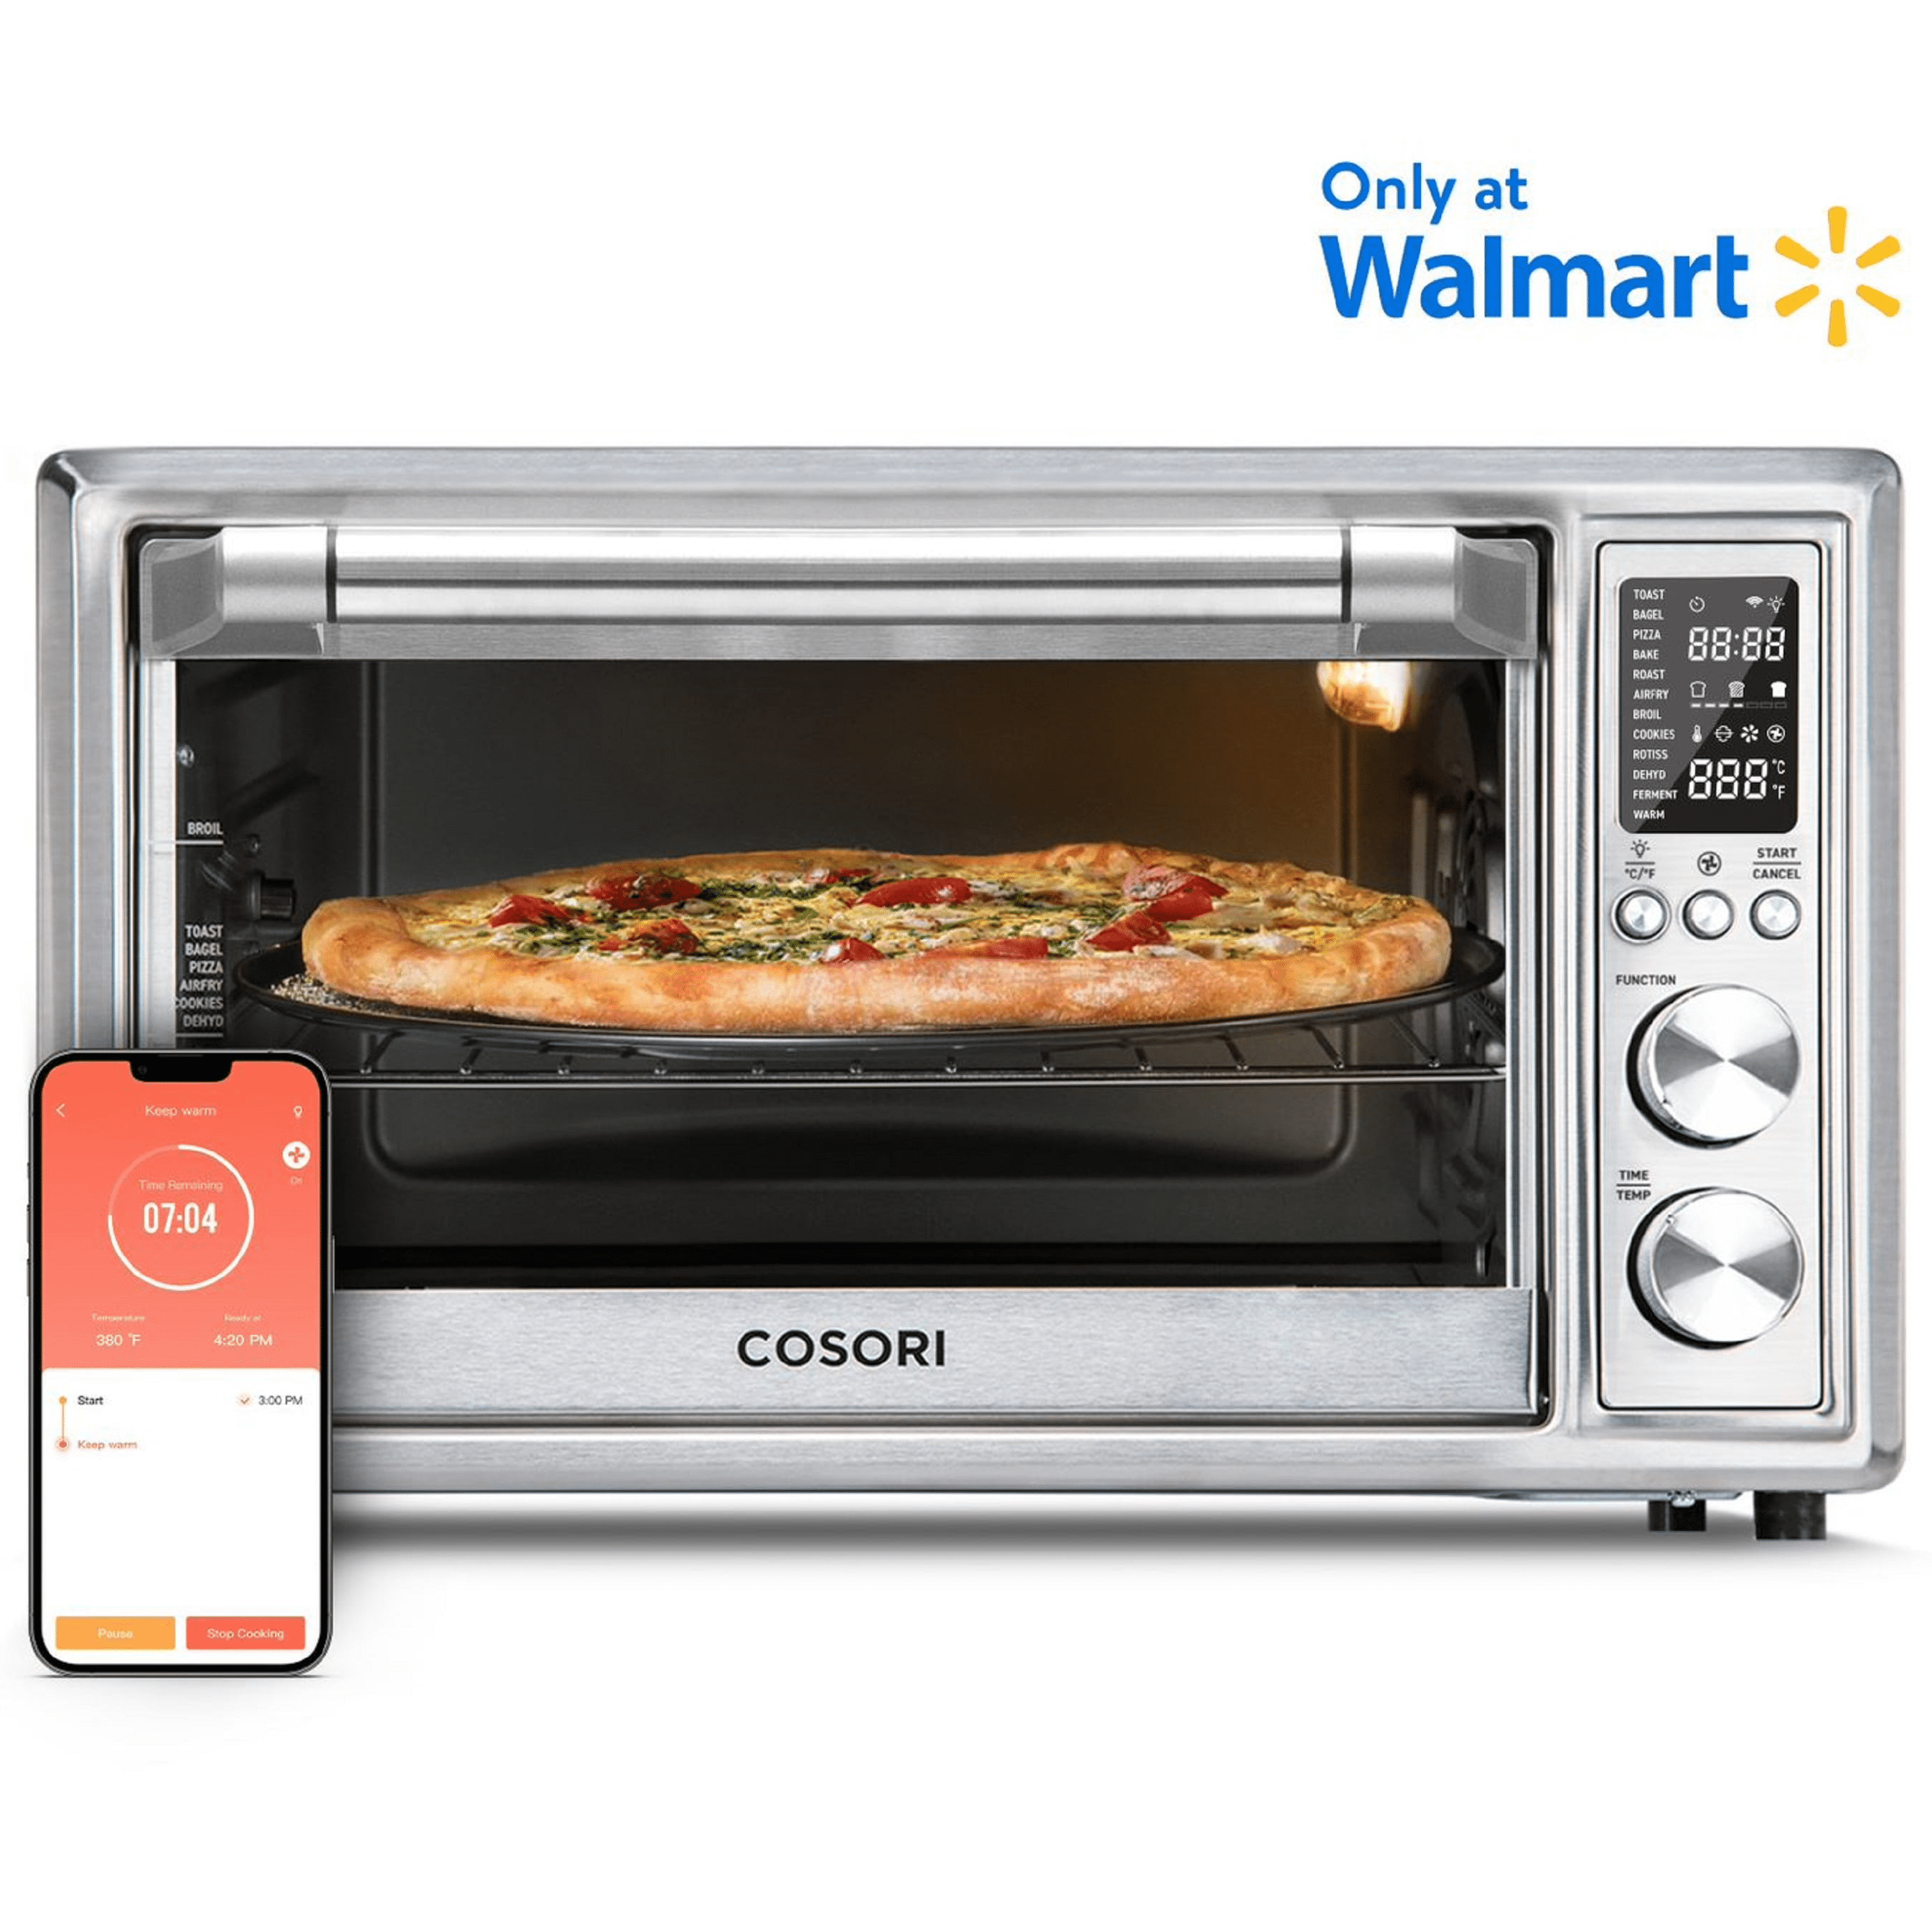 Cosori Air Fryer Toaster Oven, Smart 32QT Large Stainless Steel Convection Oven, Silver, CTO-R301S-SUSW